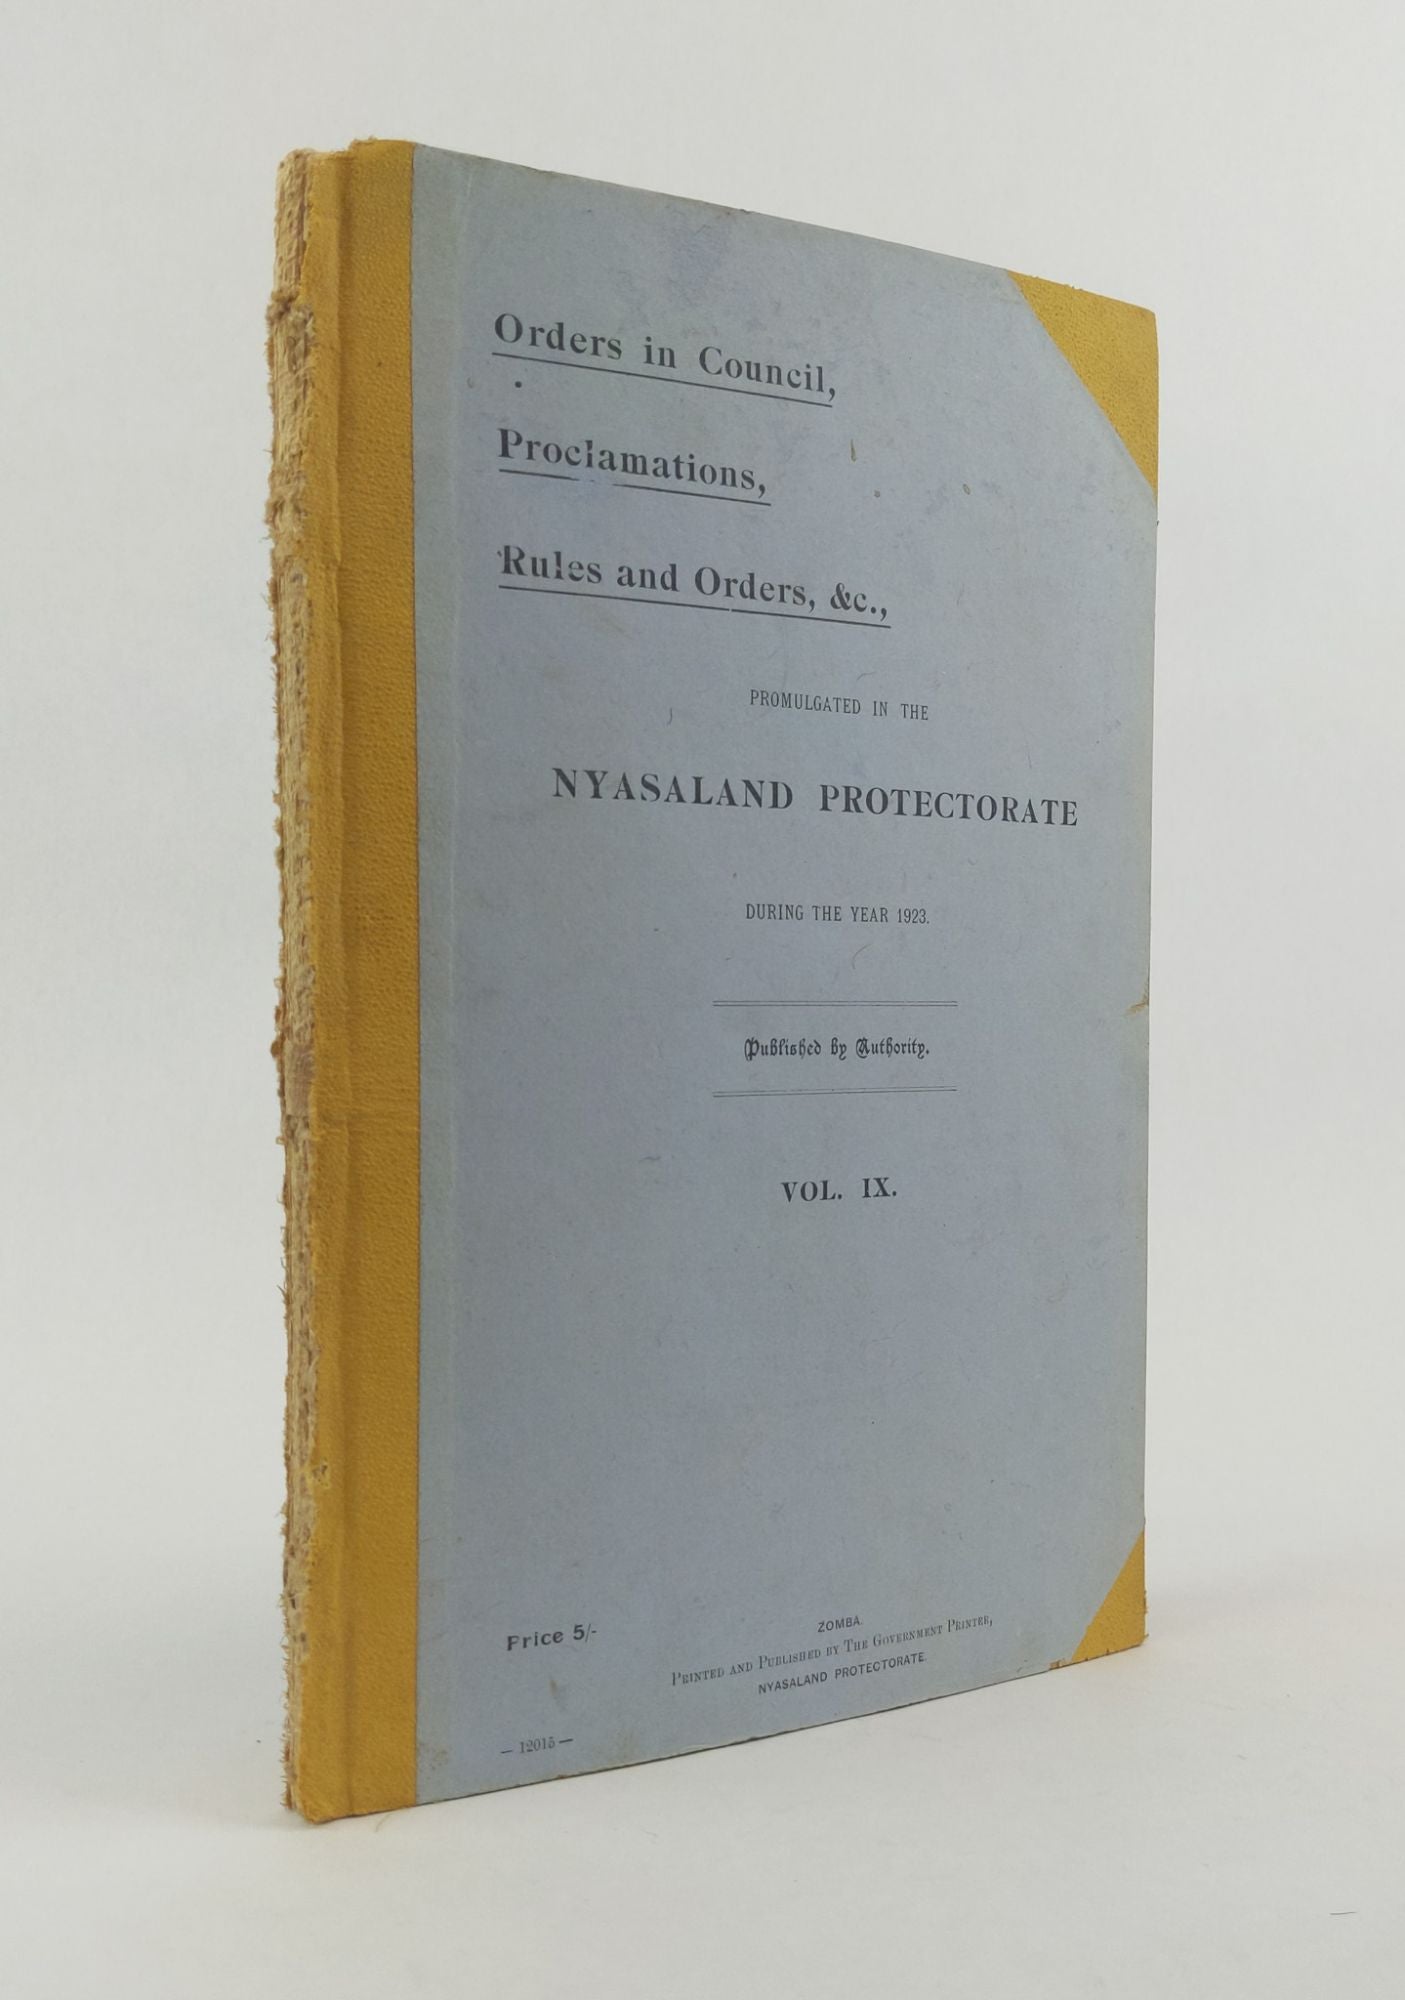 1371431 ORDERS IN COUNCIL, PROCLAMATIONS, RULES AND ORDERS, &C., PROMULGATED IN THE NYASALAND PROTECTORATE DURING THE YEAR 1923. VOL. IX